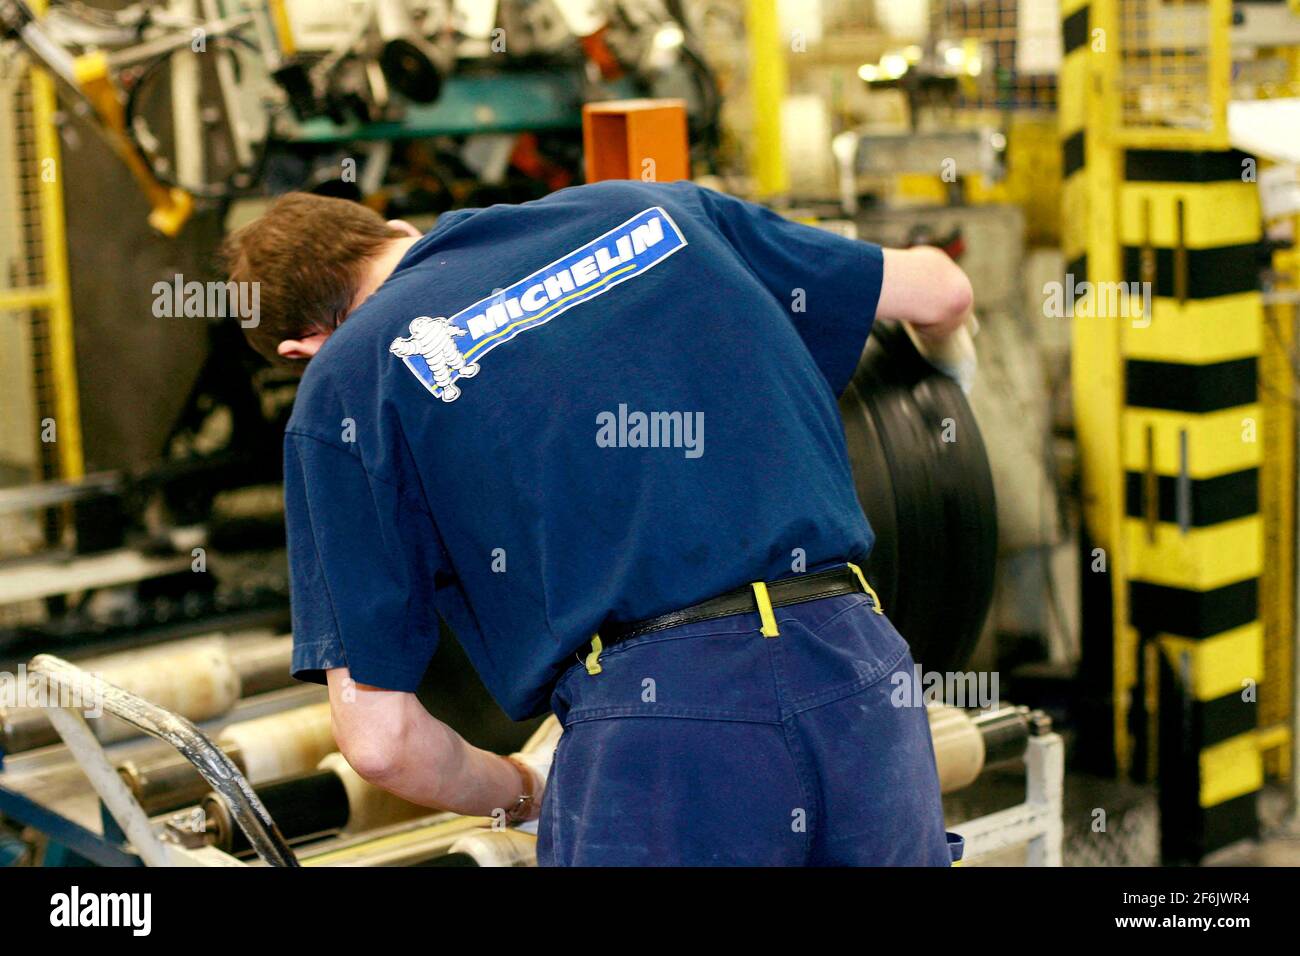 Michelin will cut 530 jobs and plans to retire 670 people in the first year  of its "simplification and competitiveness plan", its management said on  Wednesday. The plan, announced in early January,